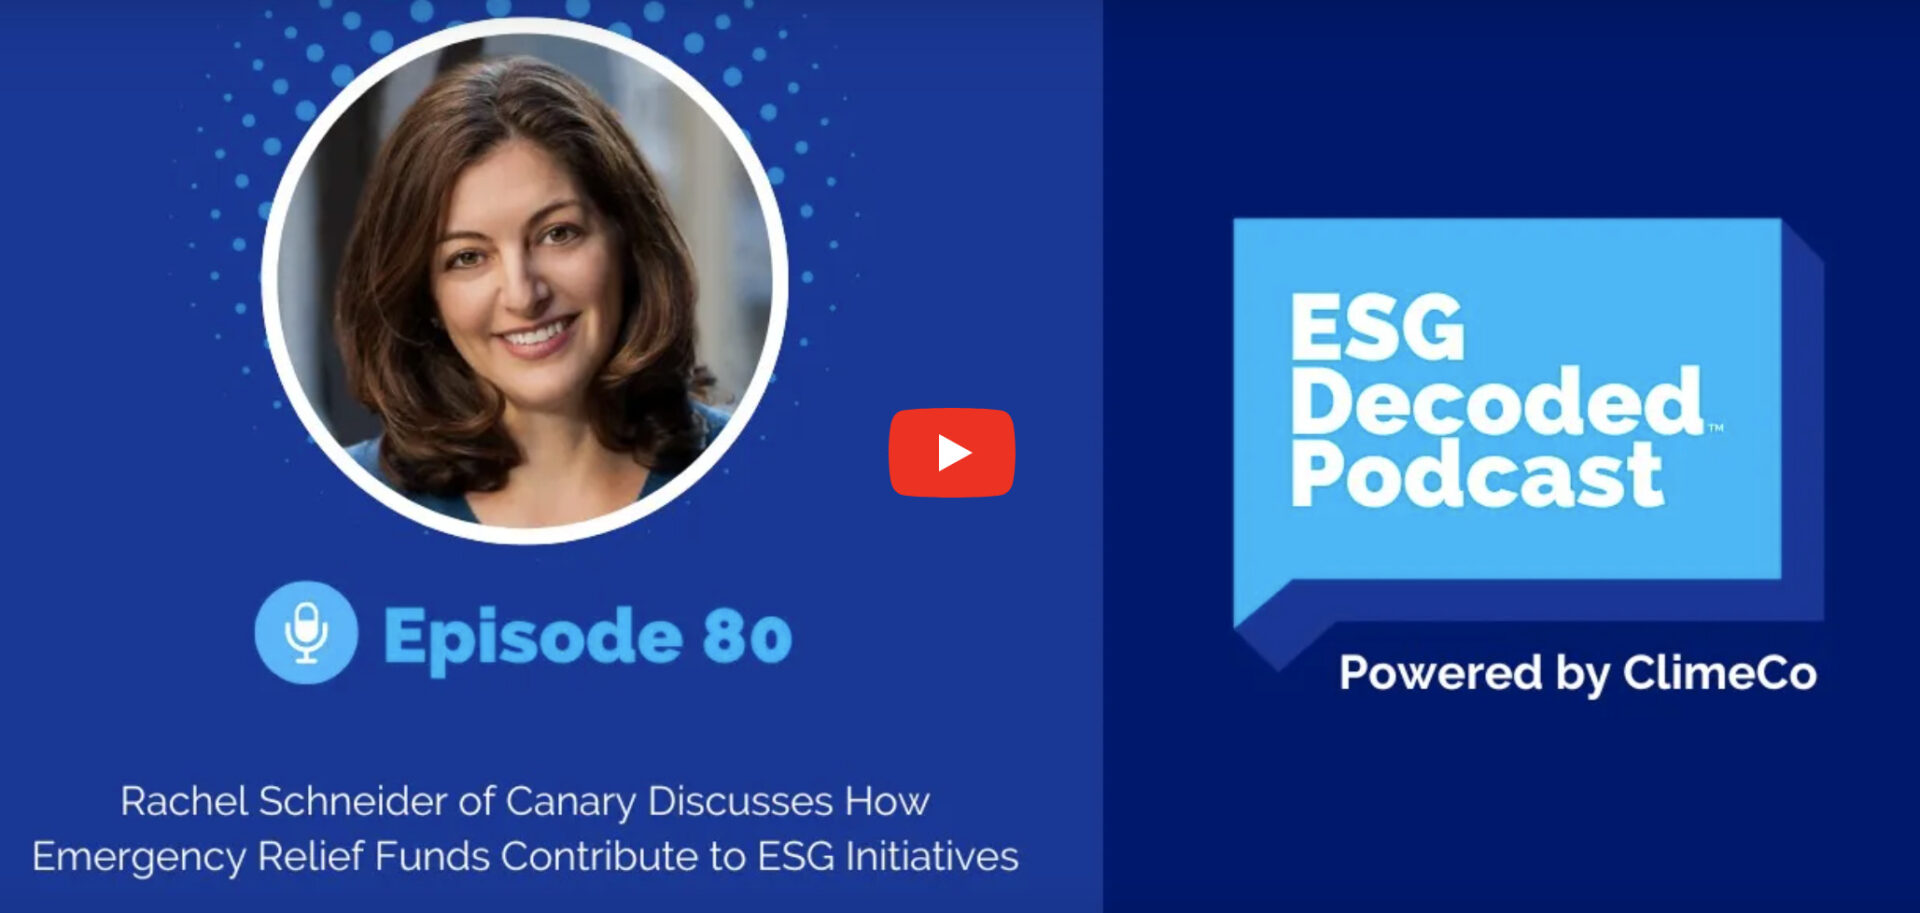 Rachel Schneider appears on the ESG Decoded podcast to talk emergency relief funds